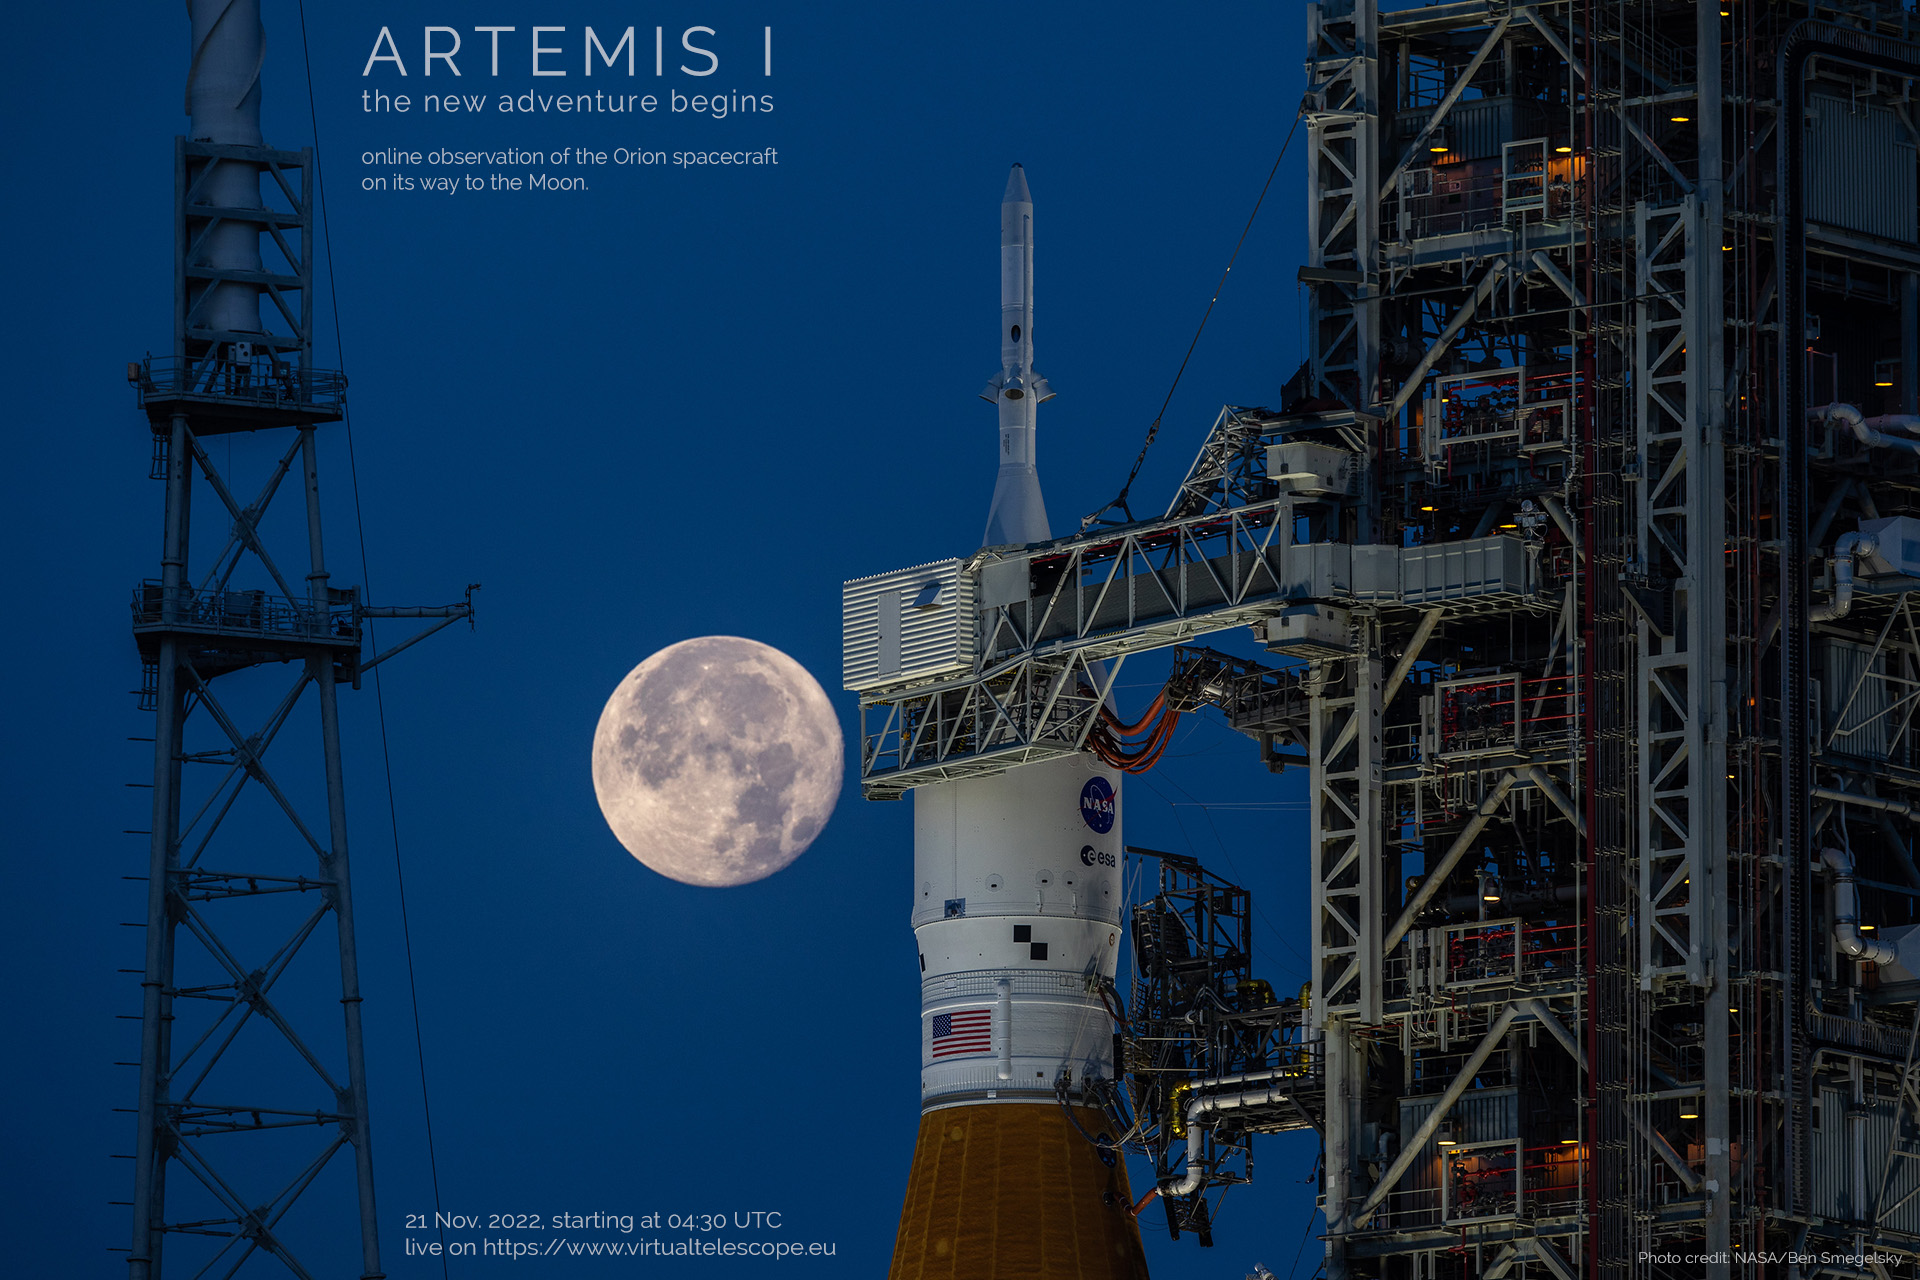 Artemis I launch: poster of the event.